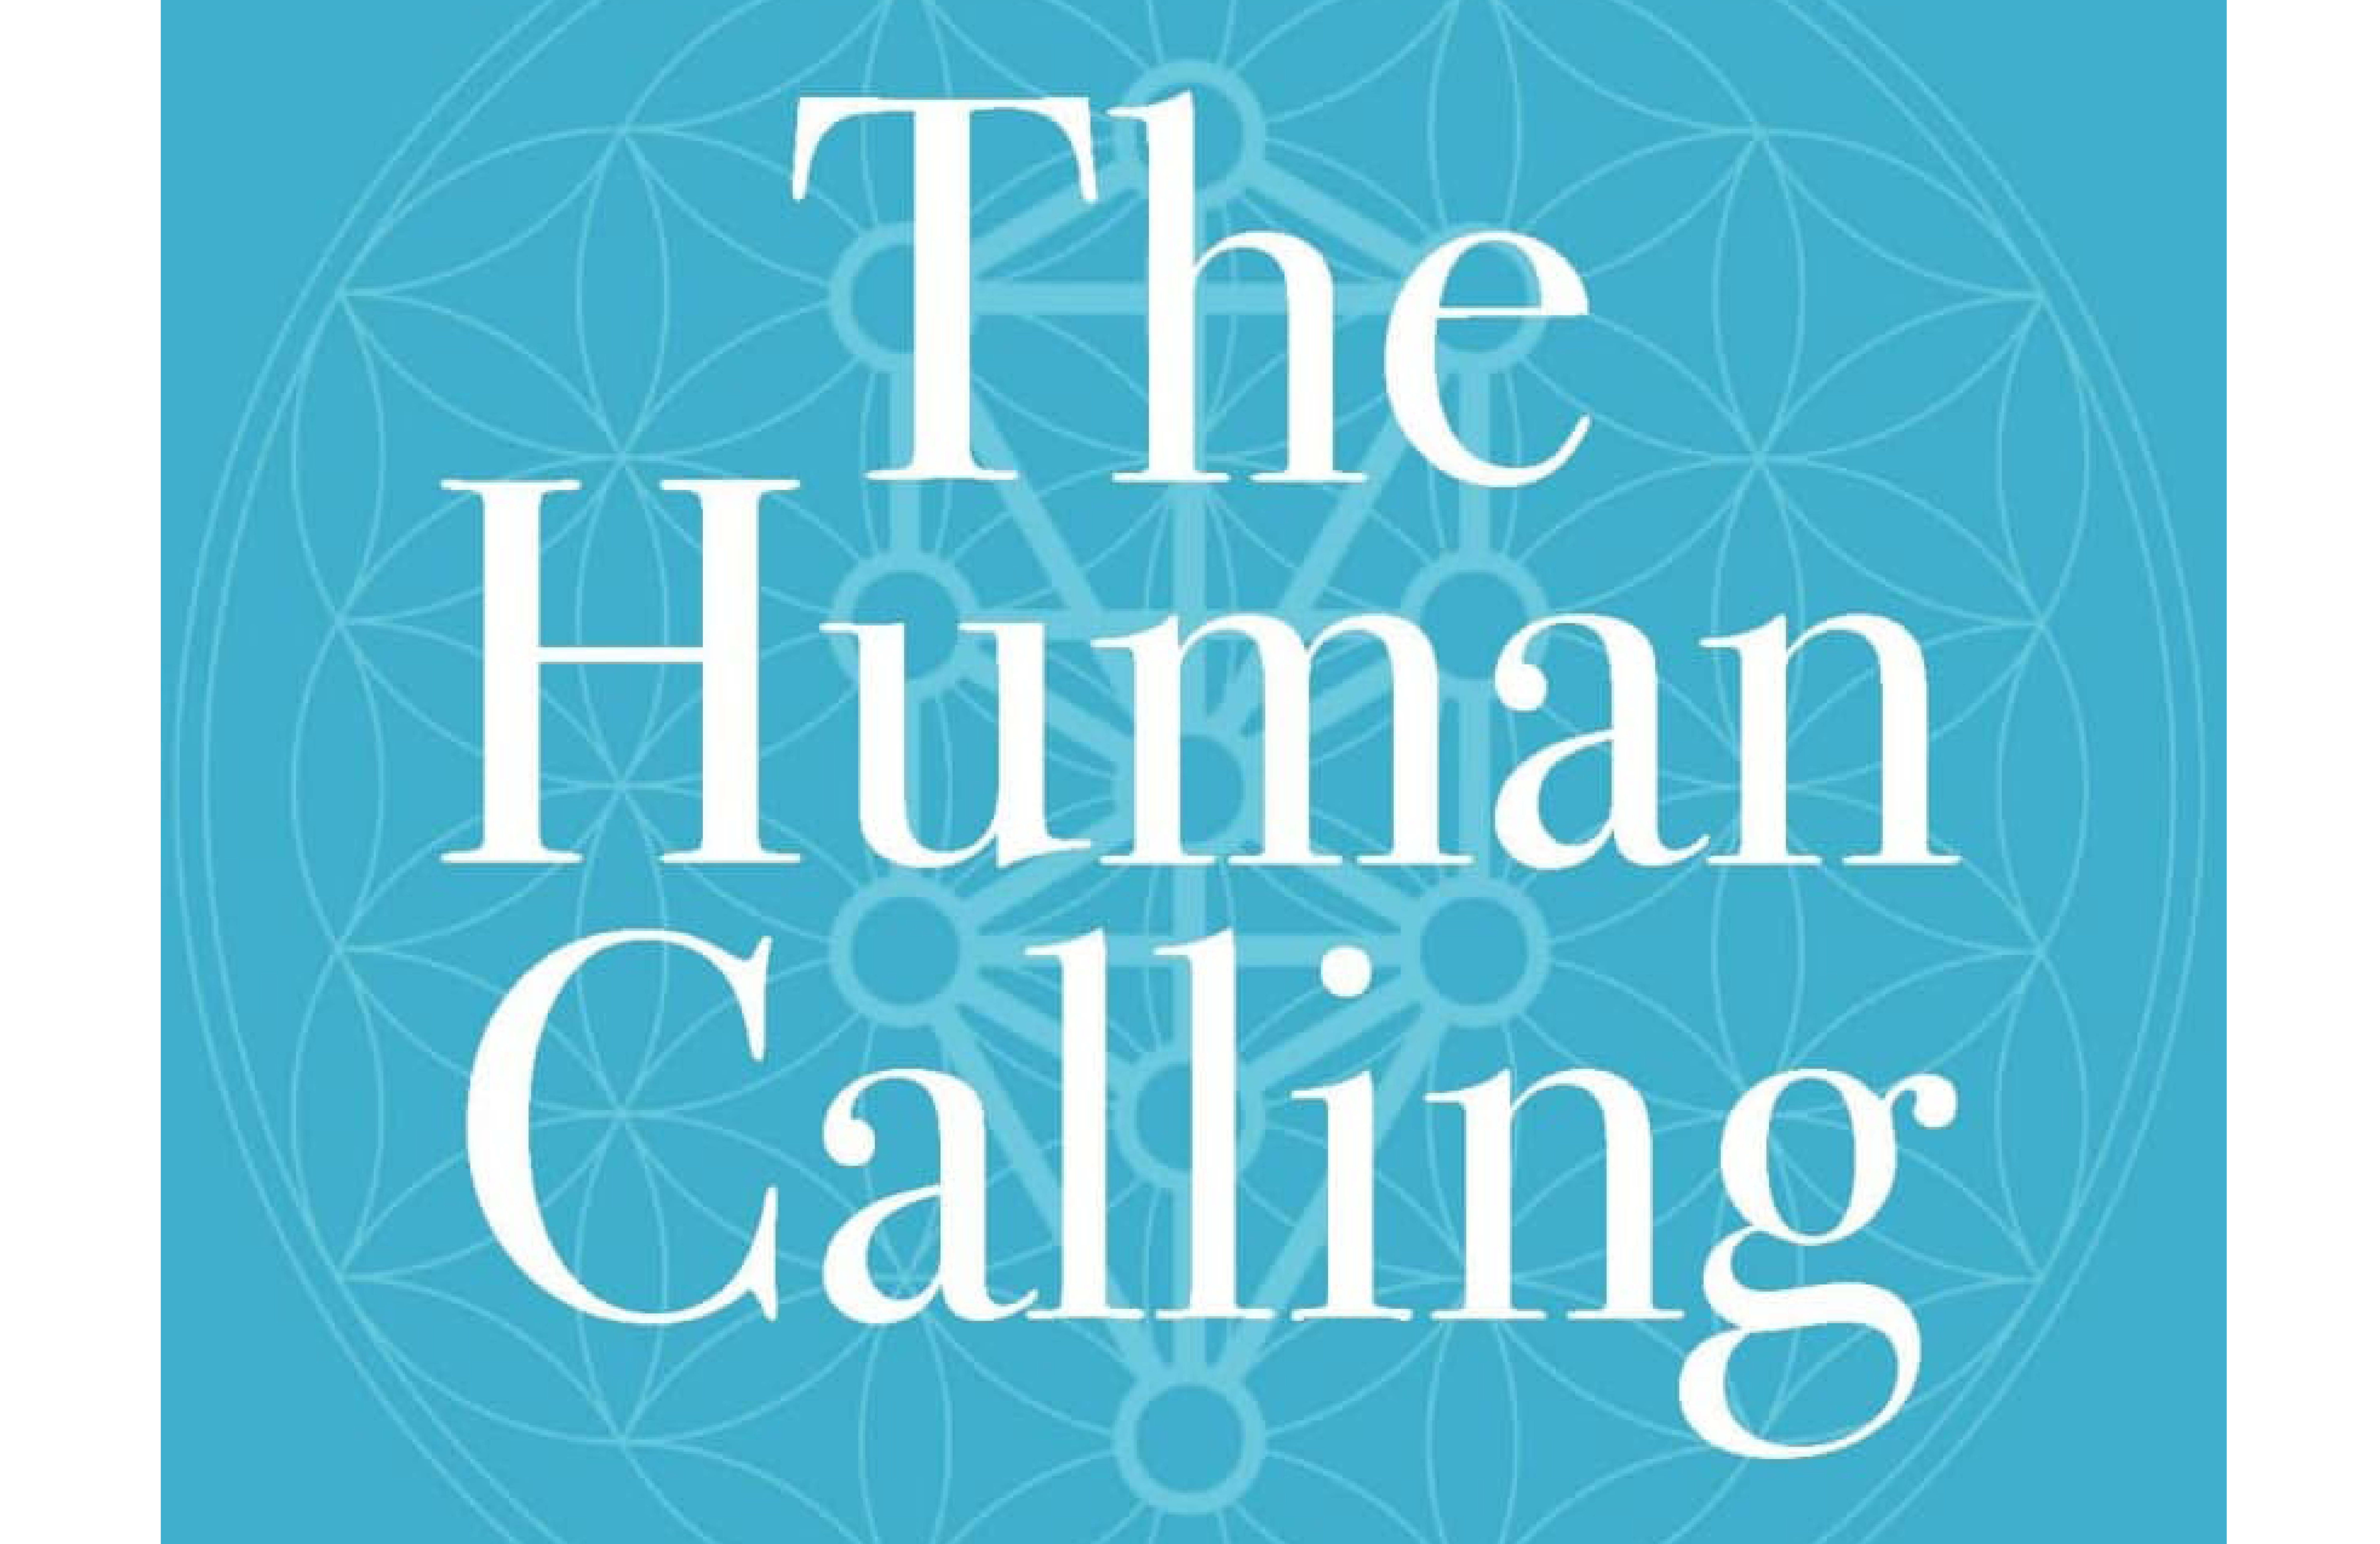 THE HUMAN CALLING: <br>Three Thousand Years of Eastern and Western Philosophical History”>
                                                                    </div>
                                <div class=